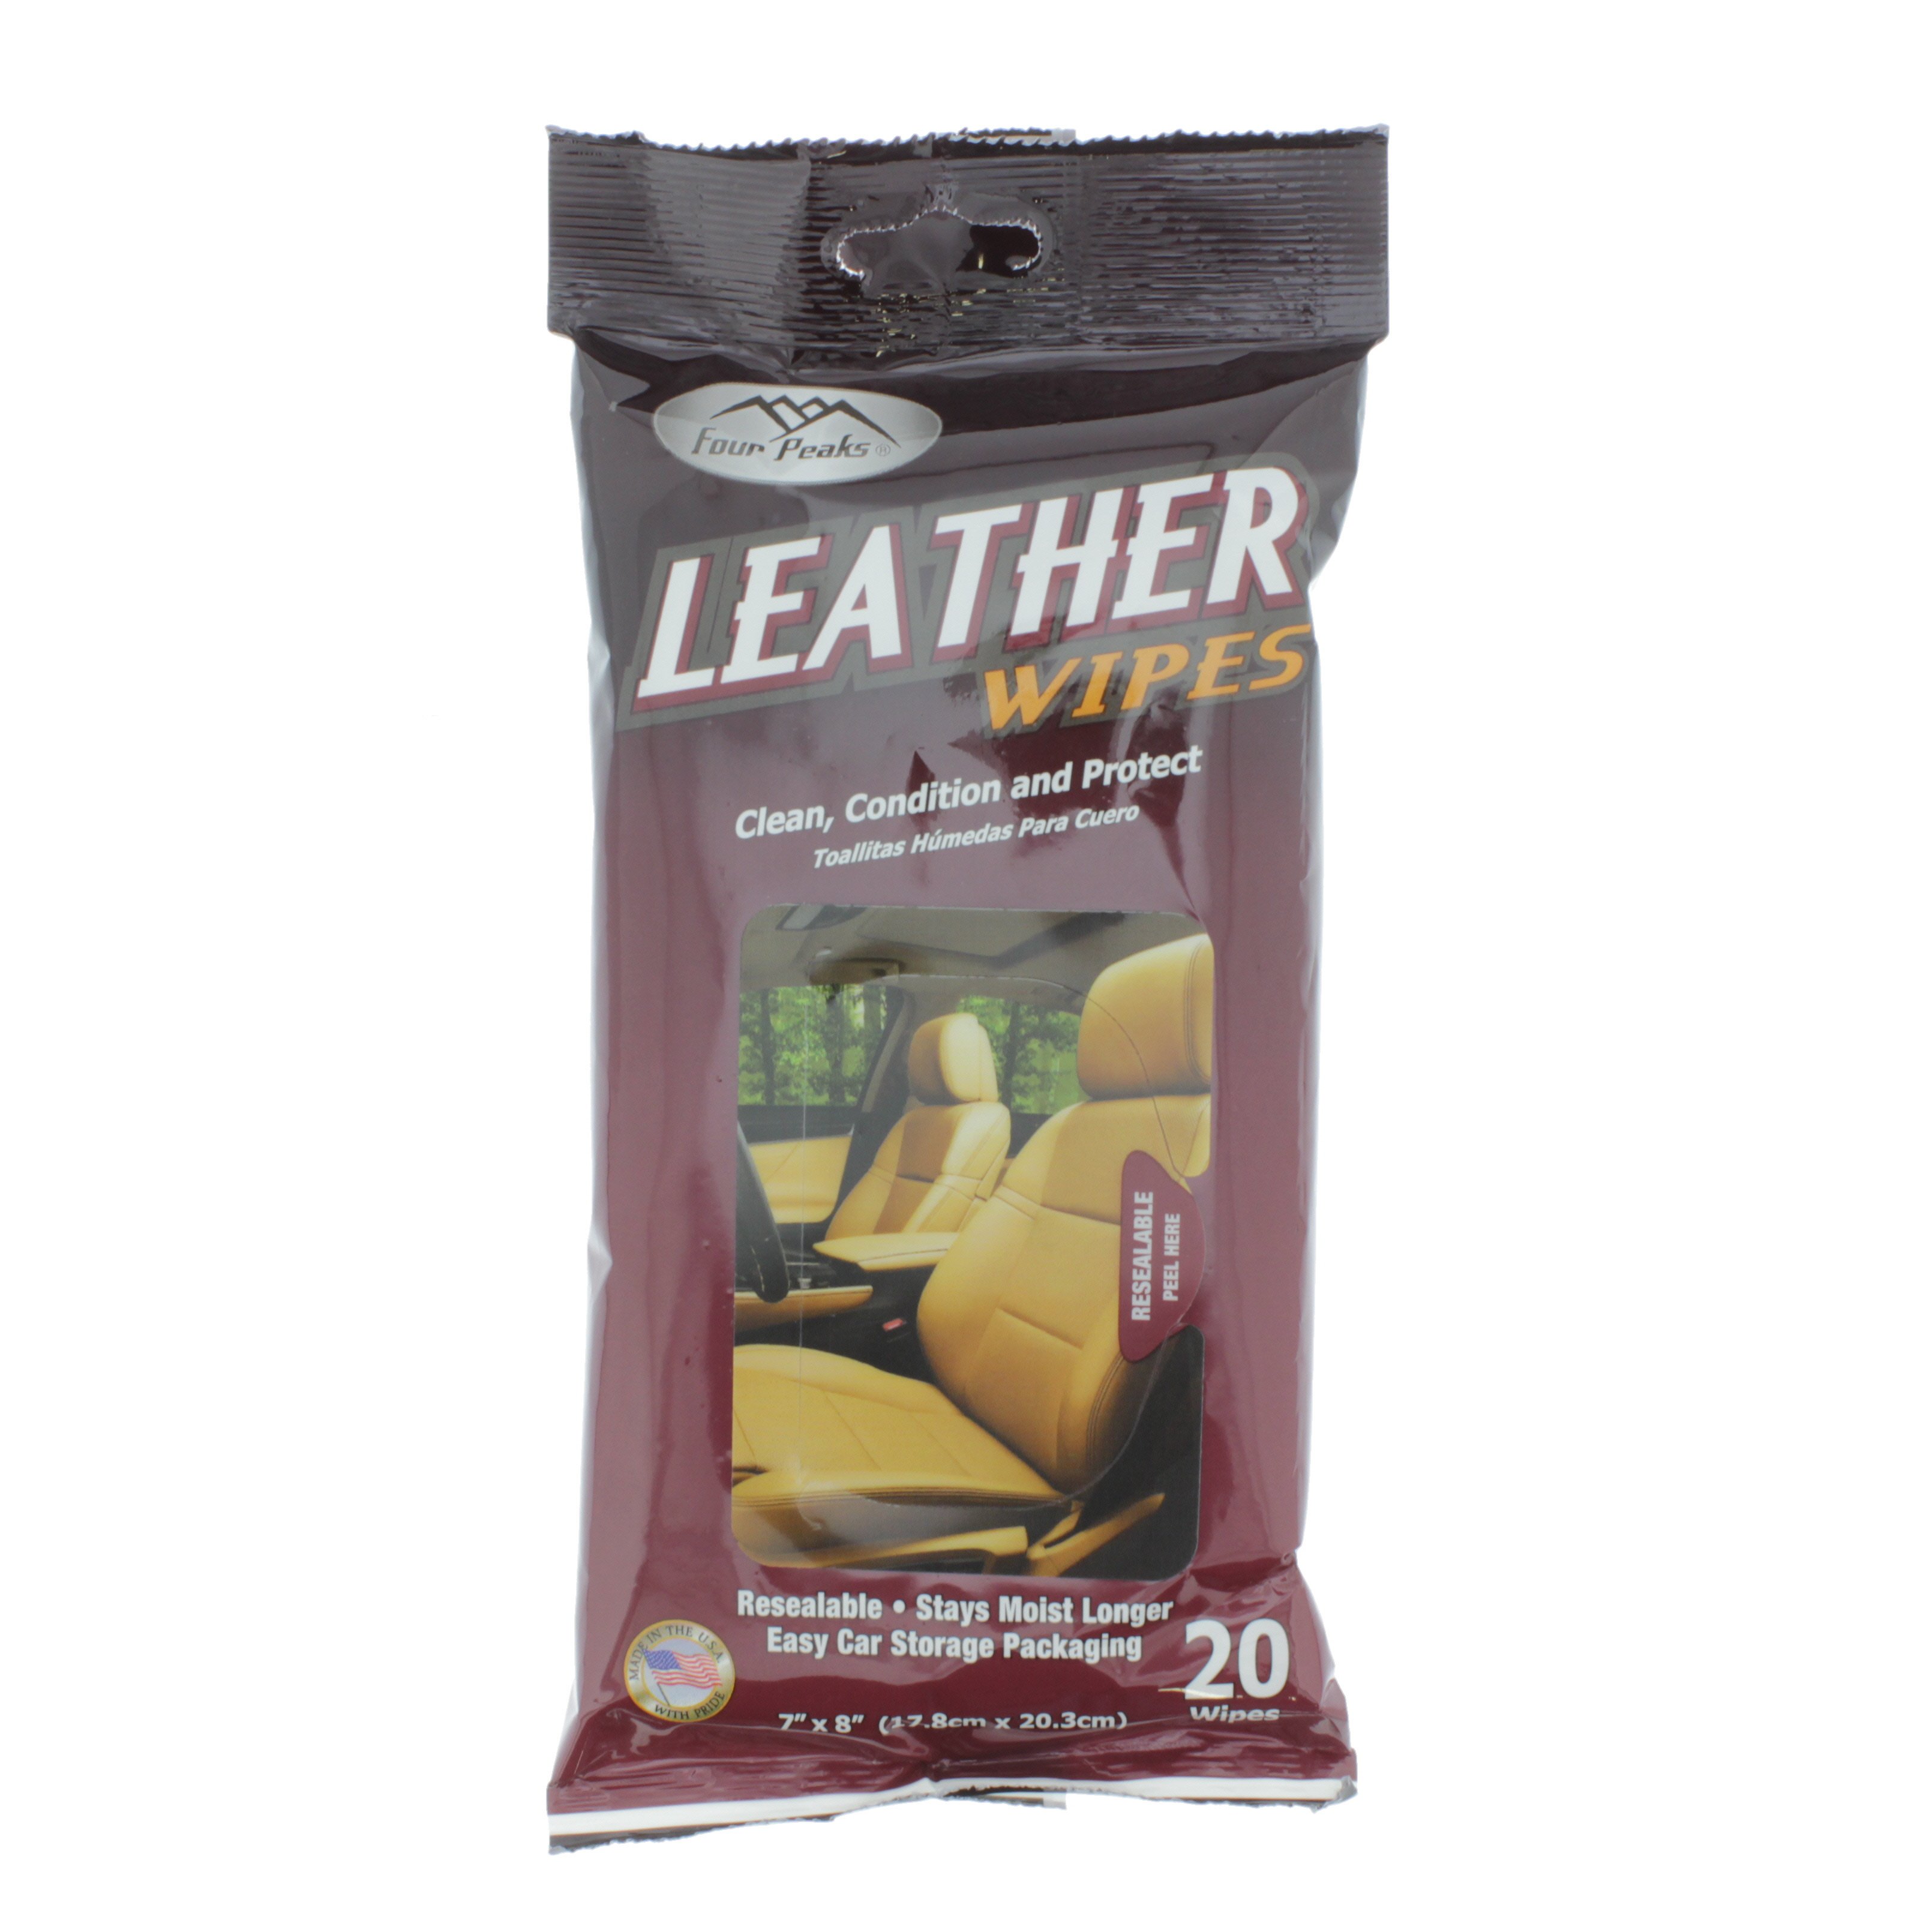 Four Peaks Leather Wipes